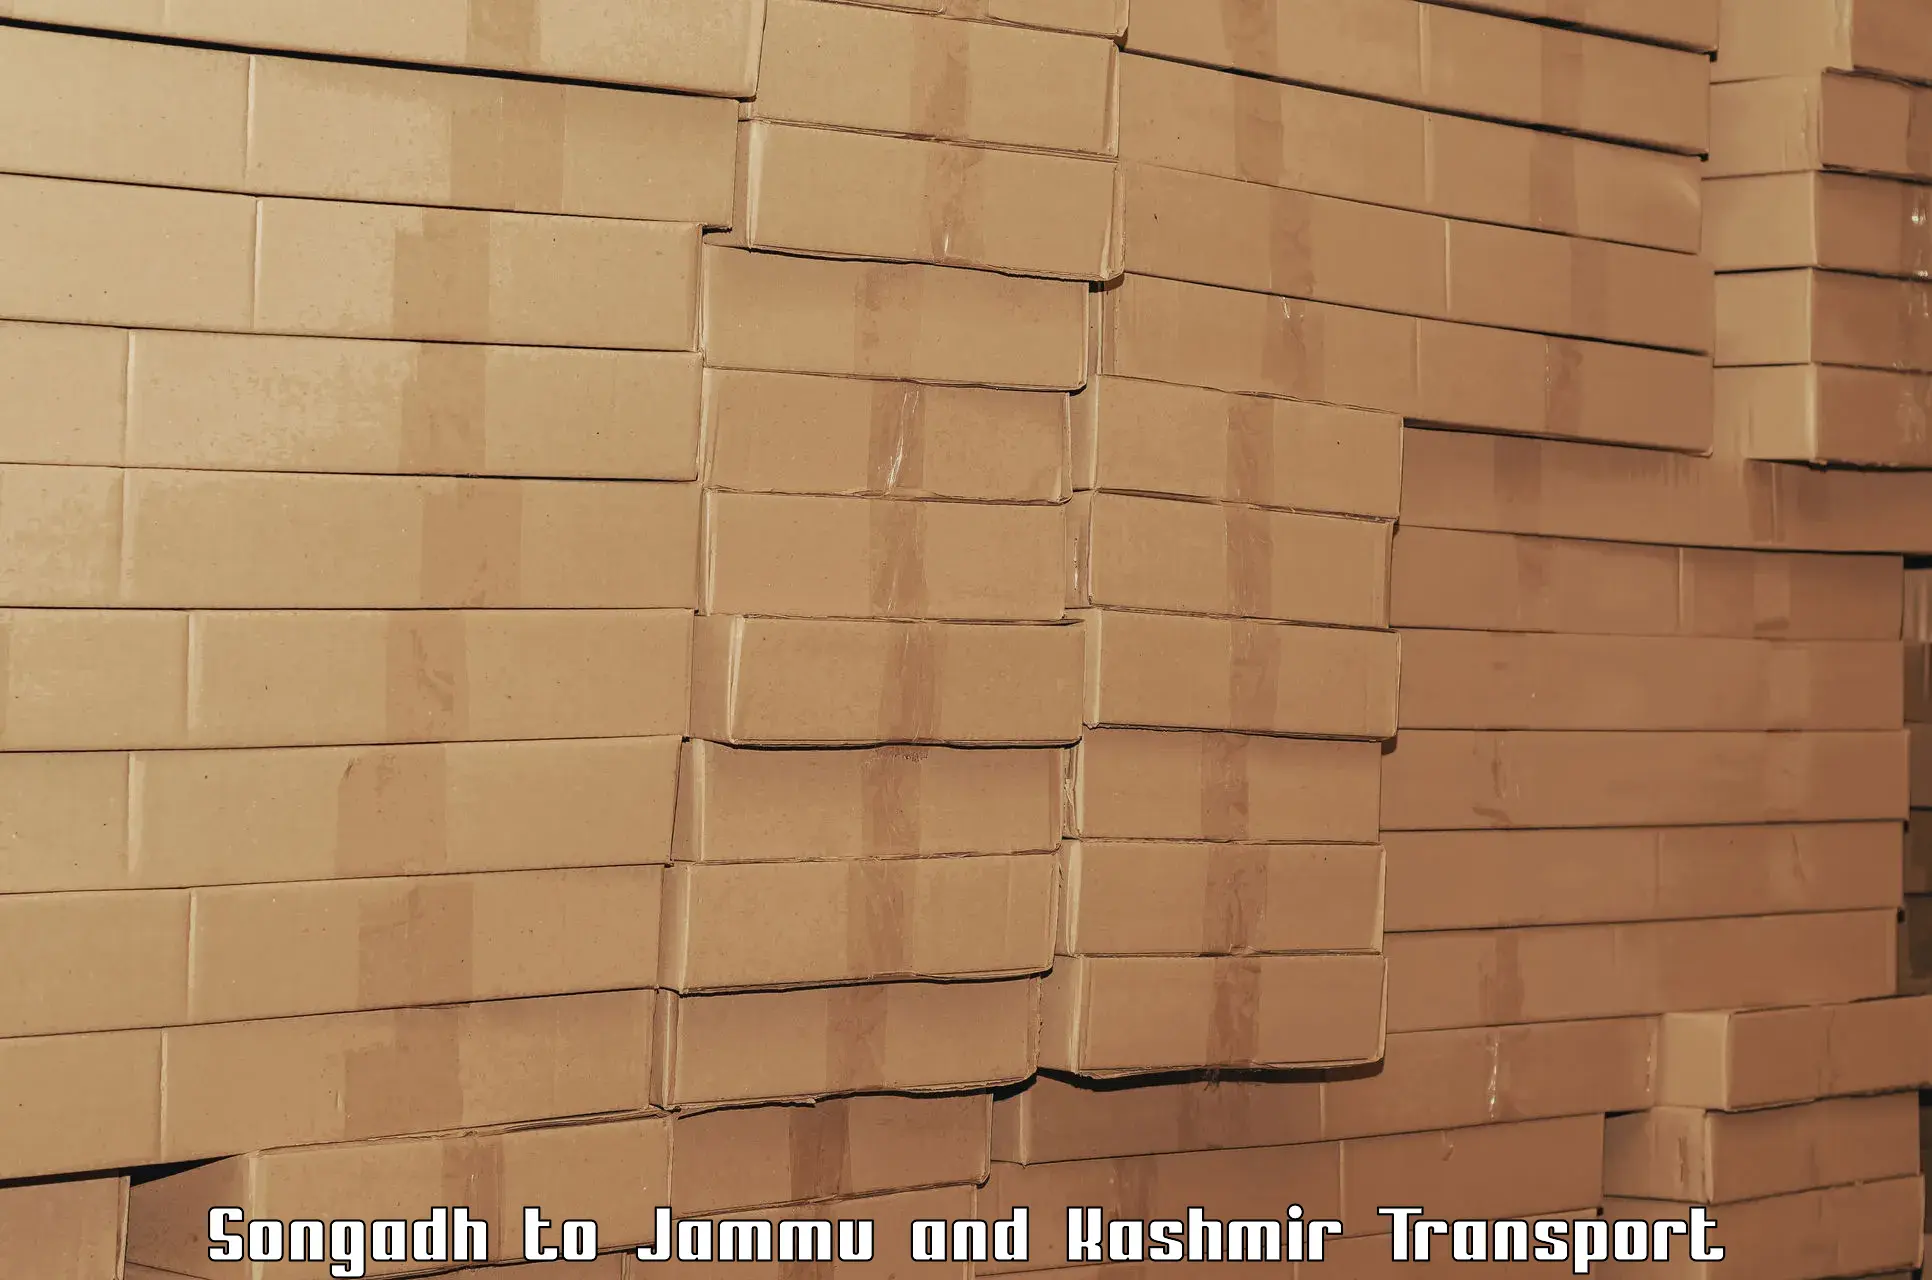 Domestic goods transportation services Songadh to Jammu